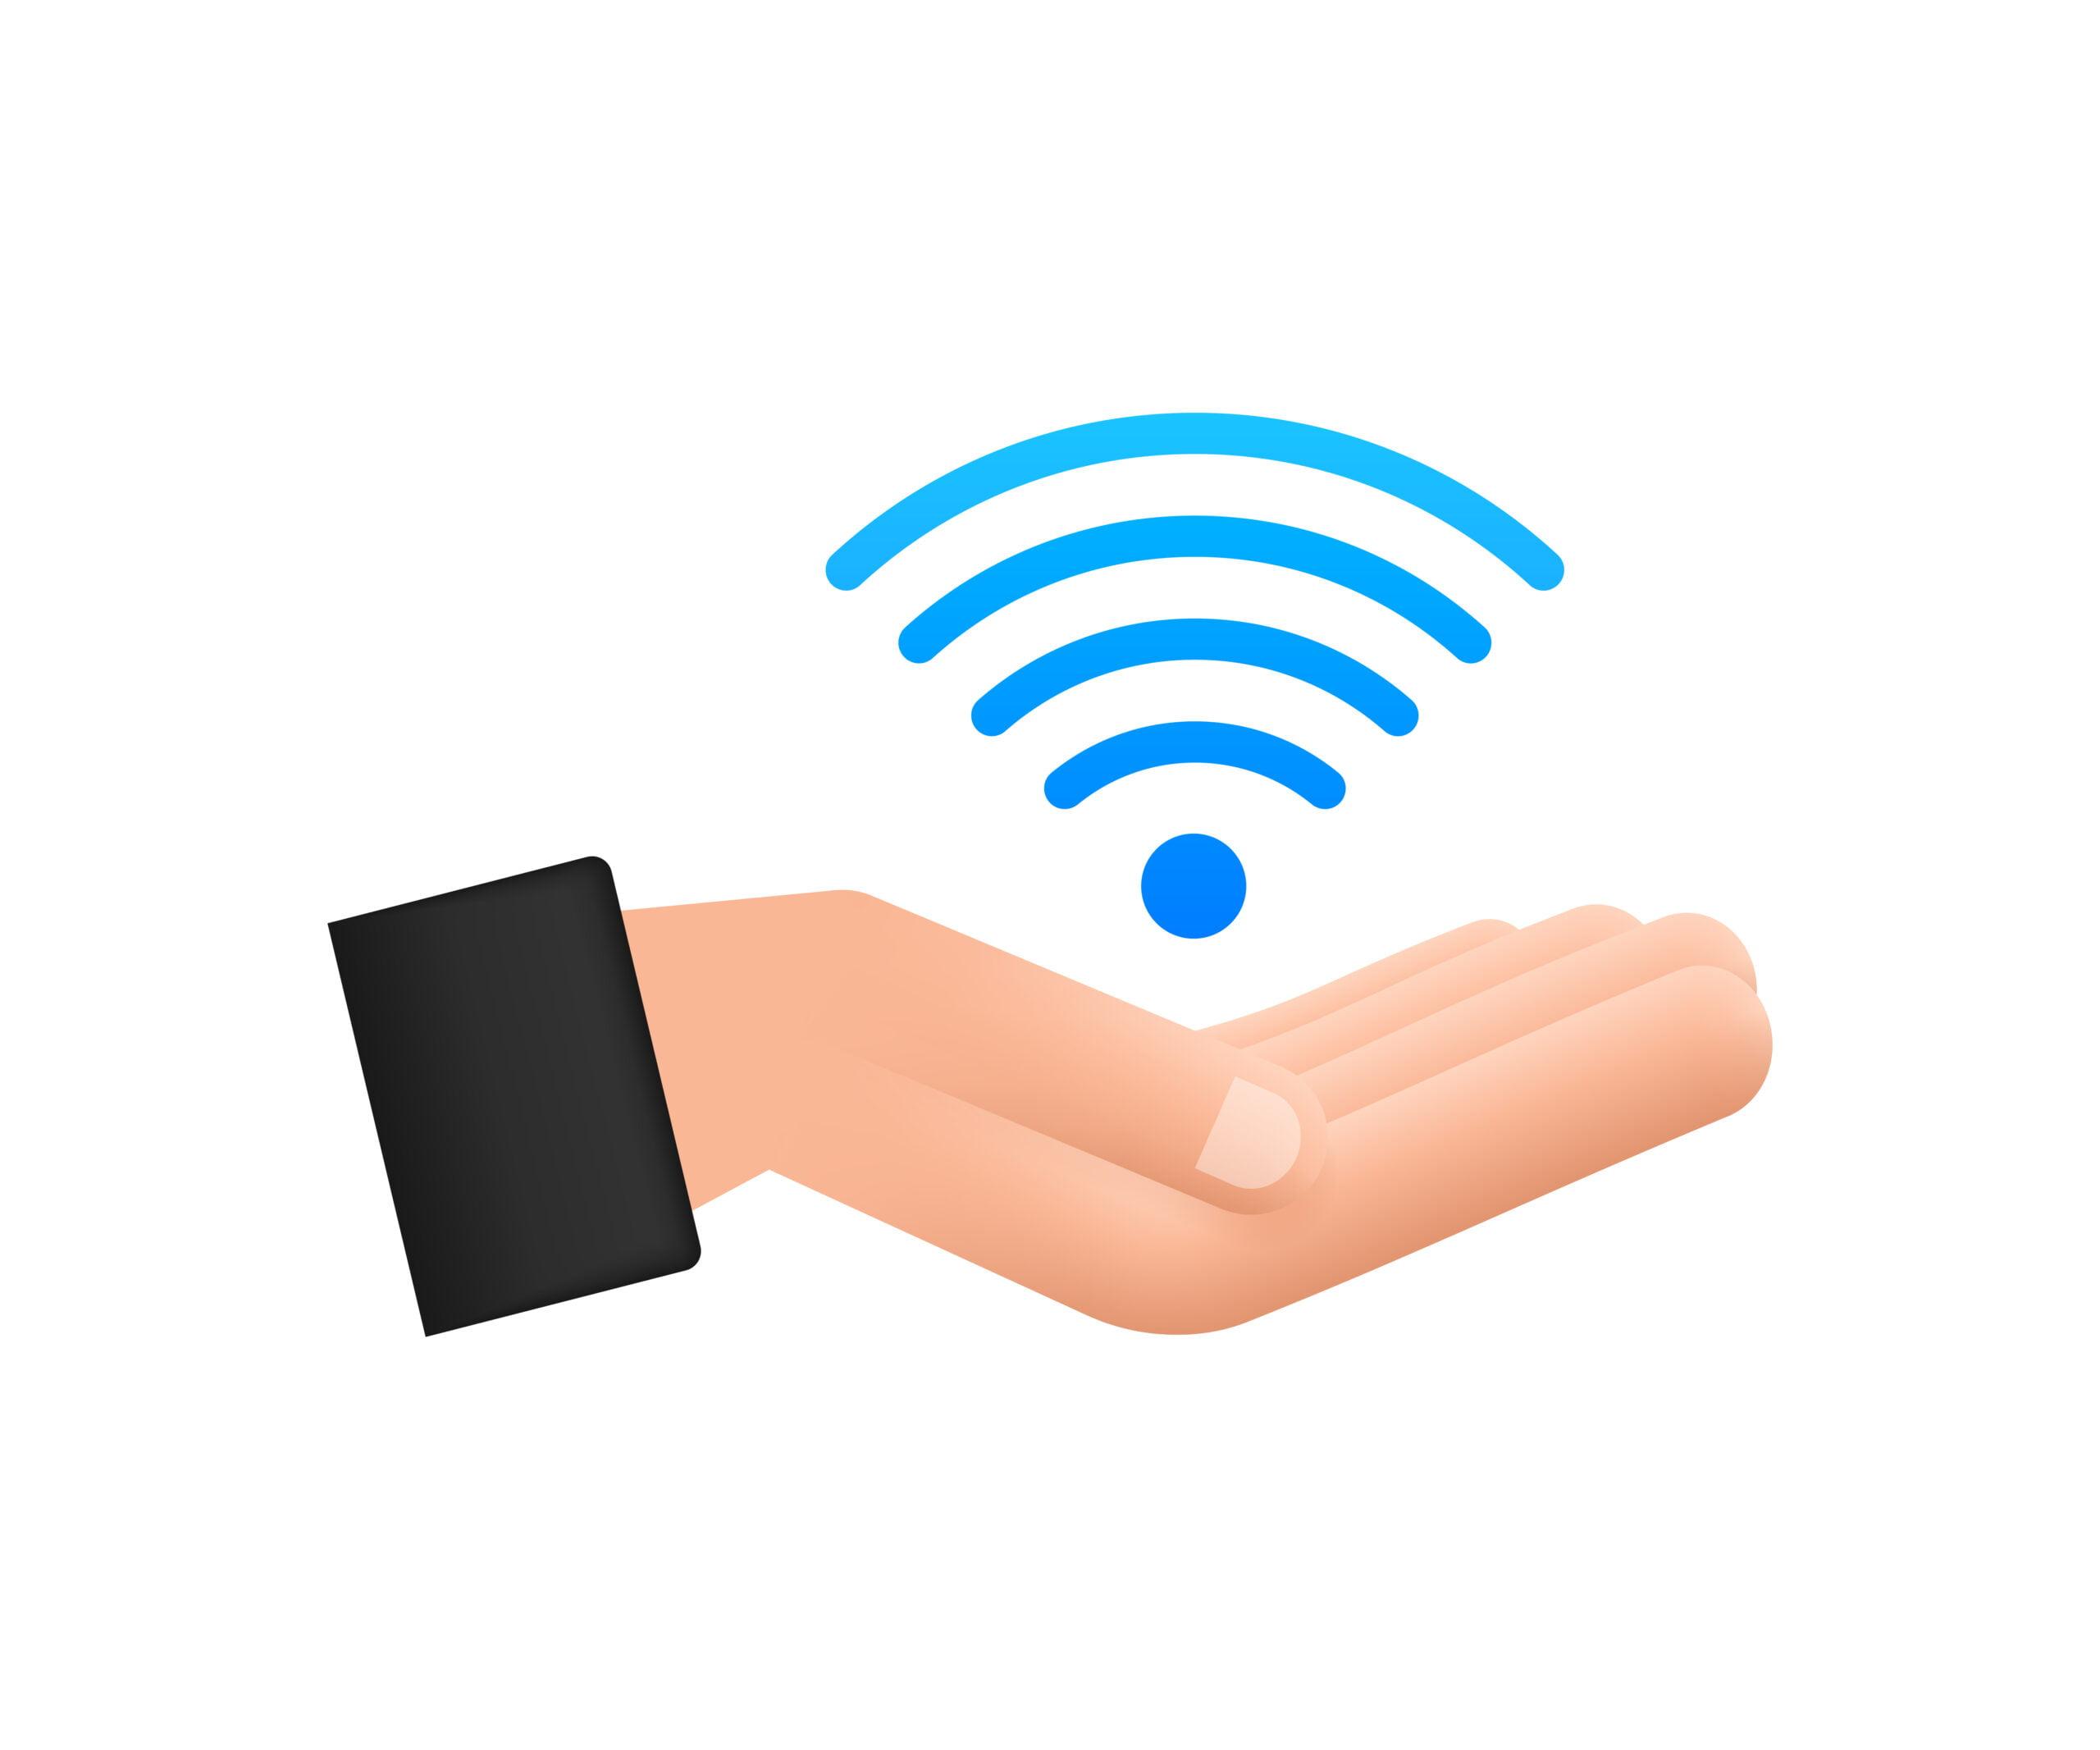 free wifi zone blue sign in hands icon. free wifi here sign concept. vector illustration.